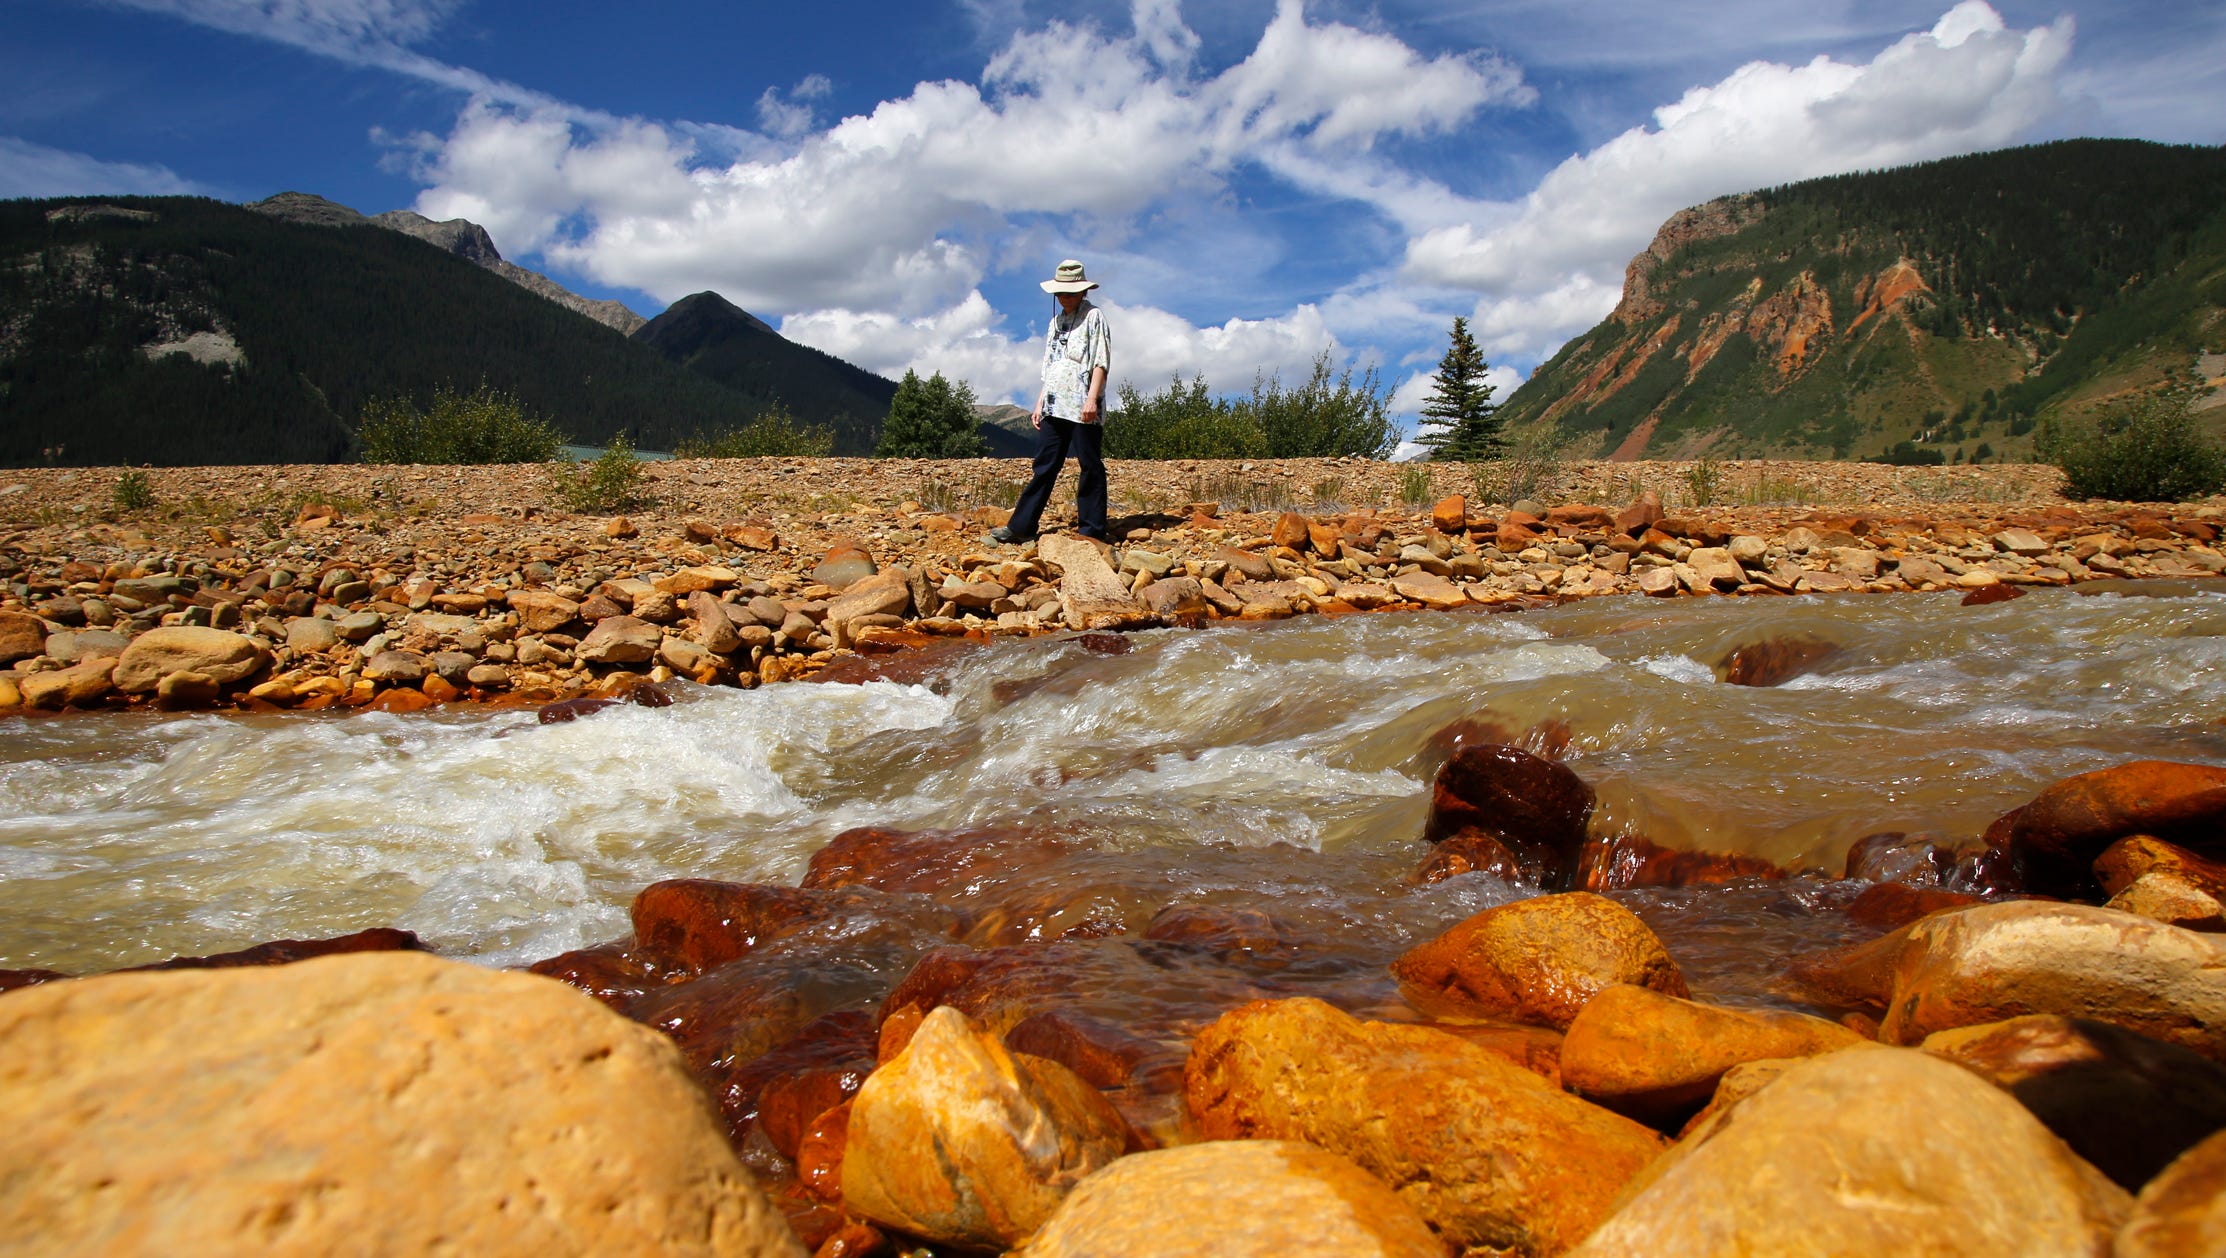 Melanie Bergolc, a resident of Silverton, Colo., walks along the banks of Cement Creek in Silverton on Aug. 10, 2015, where residue from the Gold King Mine spill is evident.